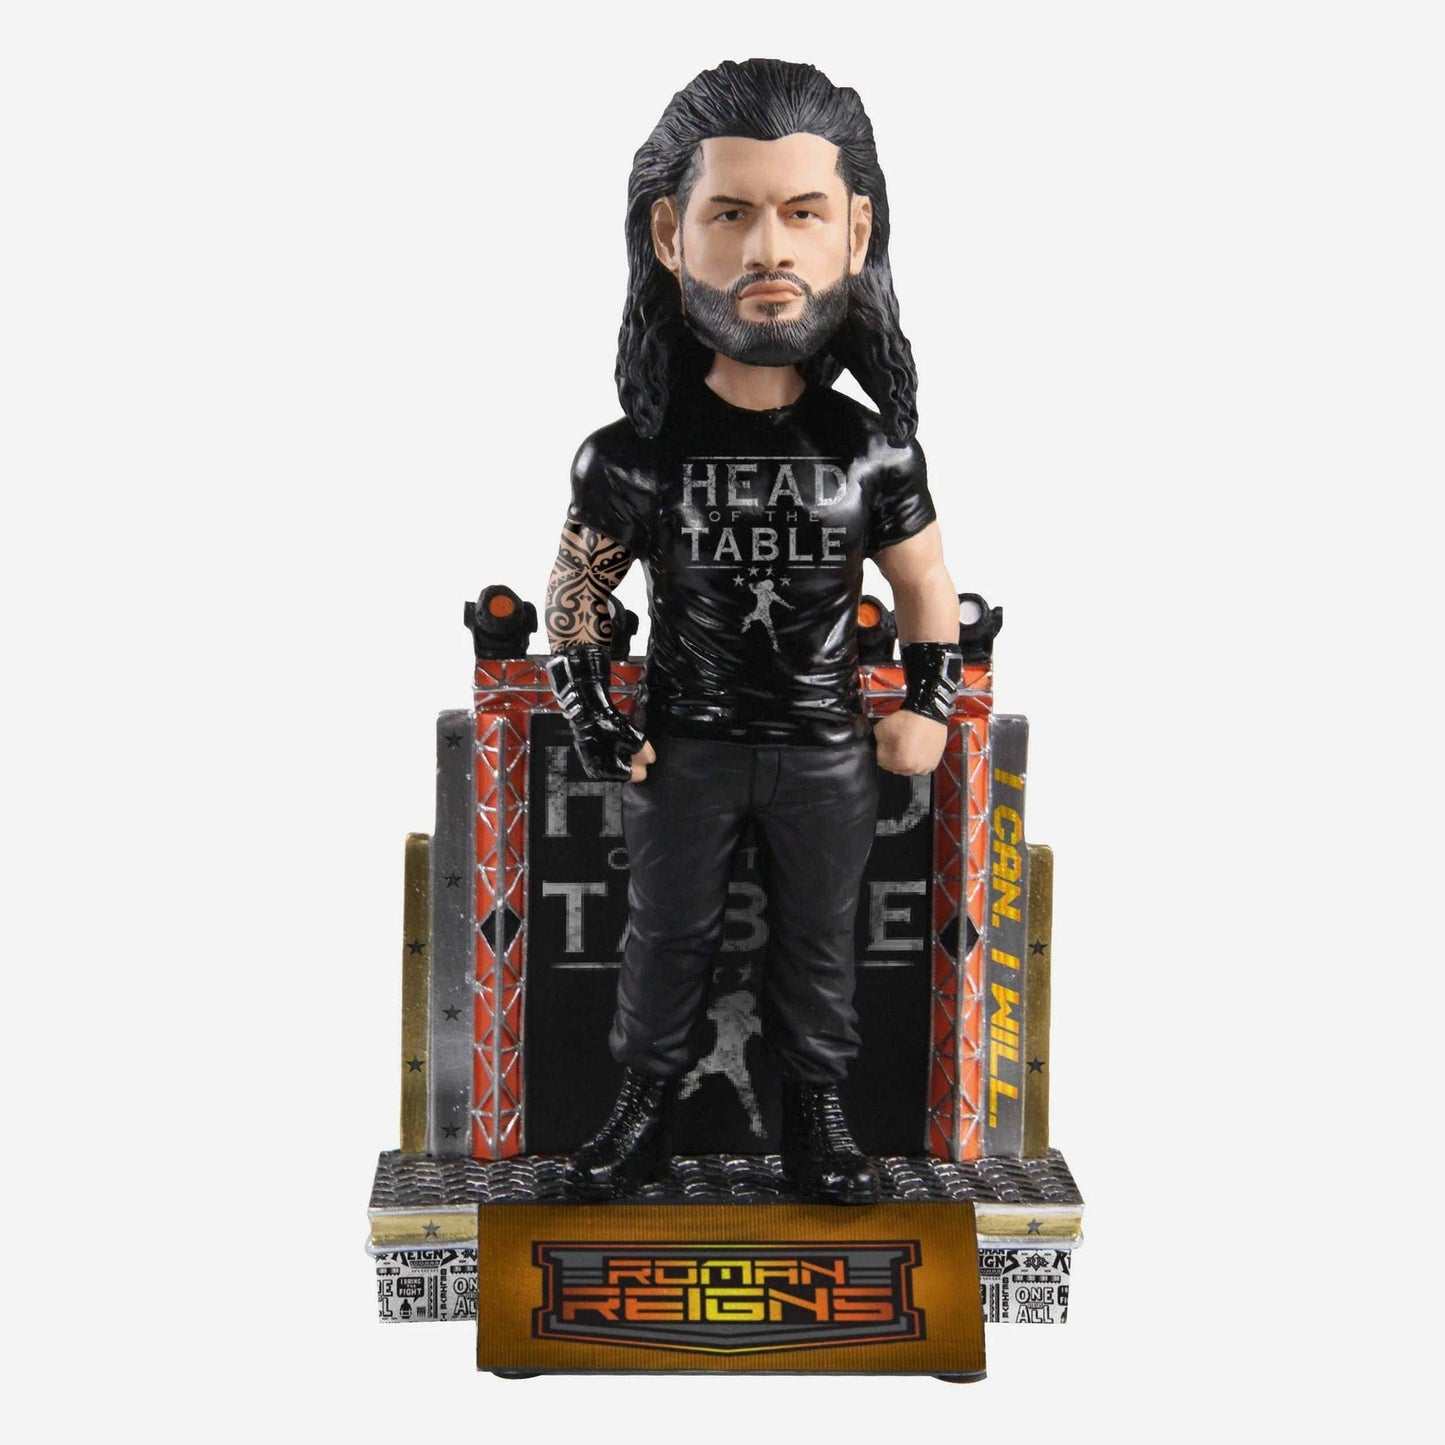 2021 WWE FOCO Bobbleheads Limited Edition Roman Reigns